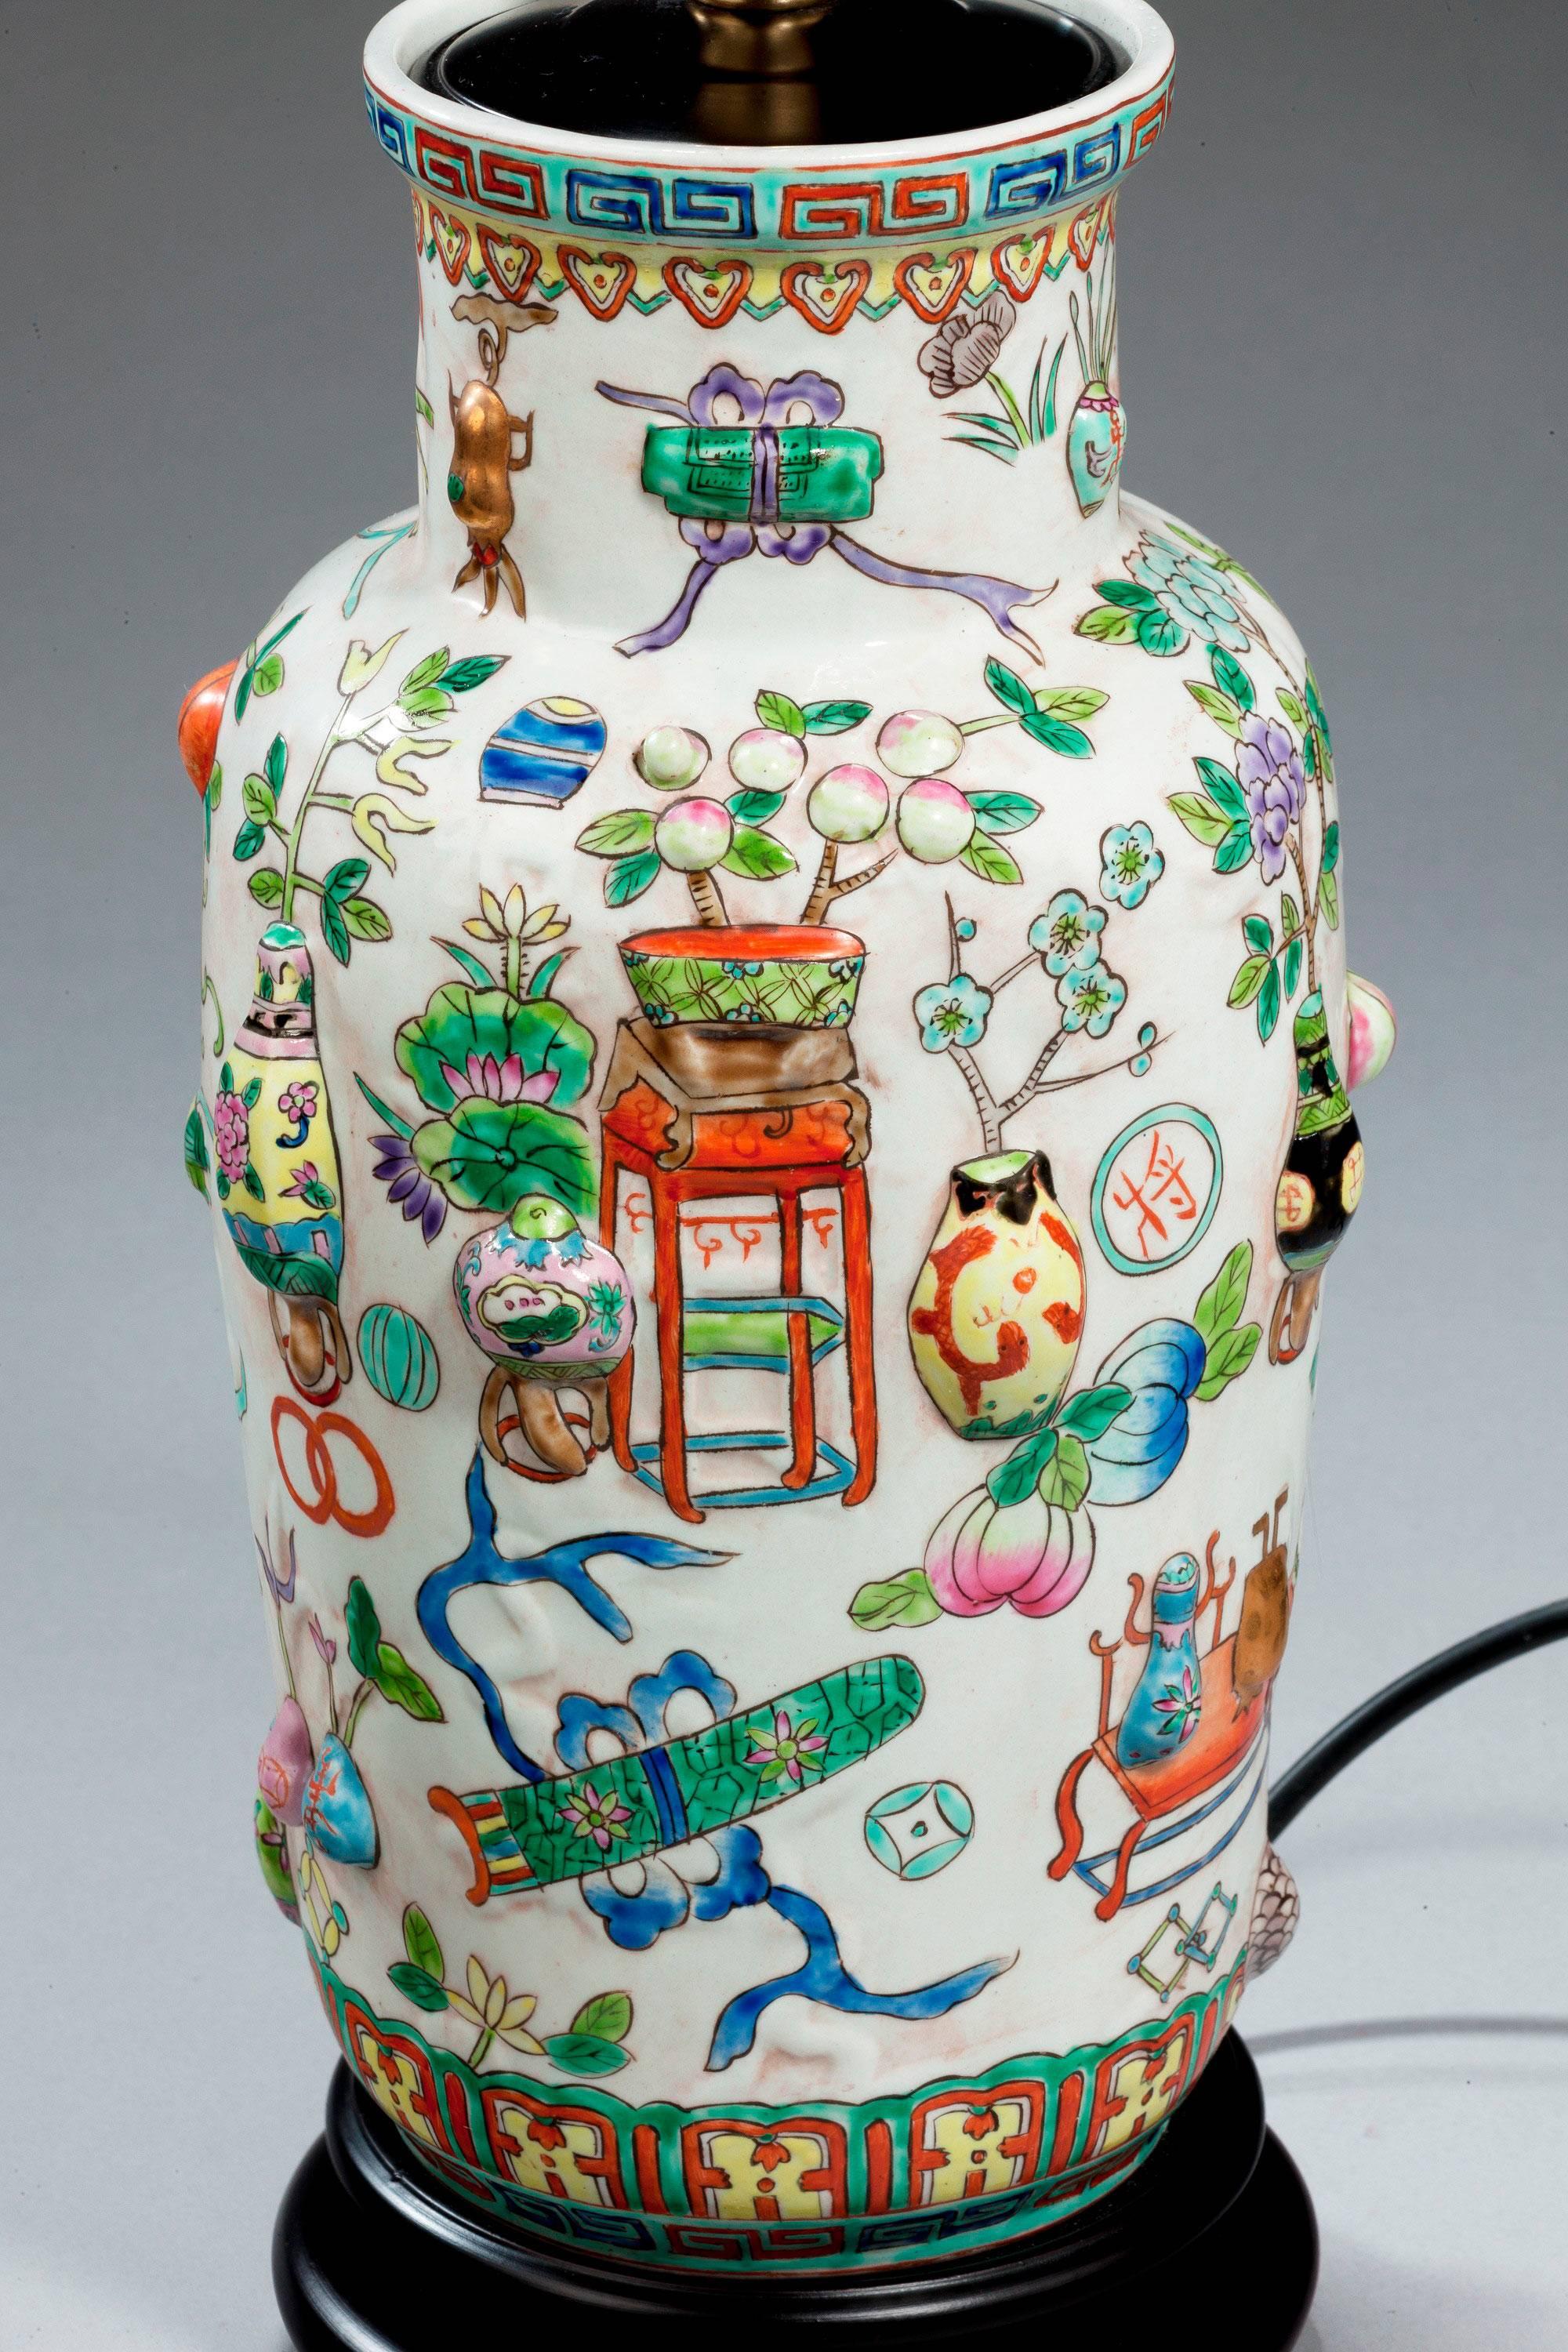 A single porcelain lamp of Canton design, with raised 'one hundred antiques' enamels. Modern.

Canton porcelains are Chinese ceramic wares made for export in the 18th to the 20th centuries. The wares were made, glazed and fired at Jingdezhen but